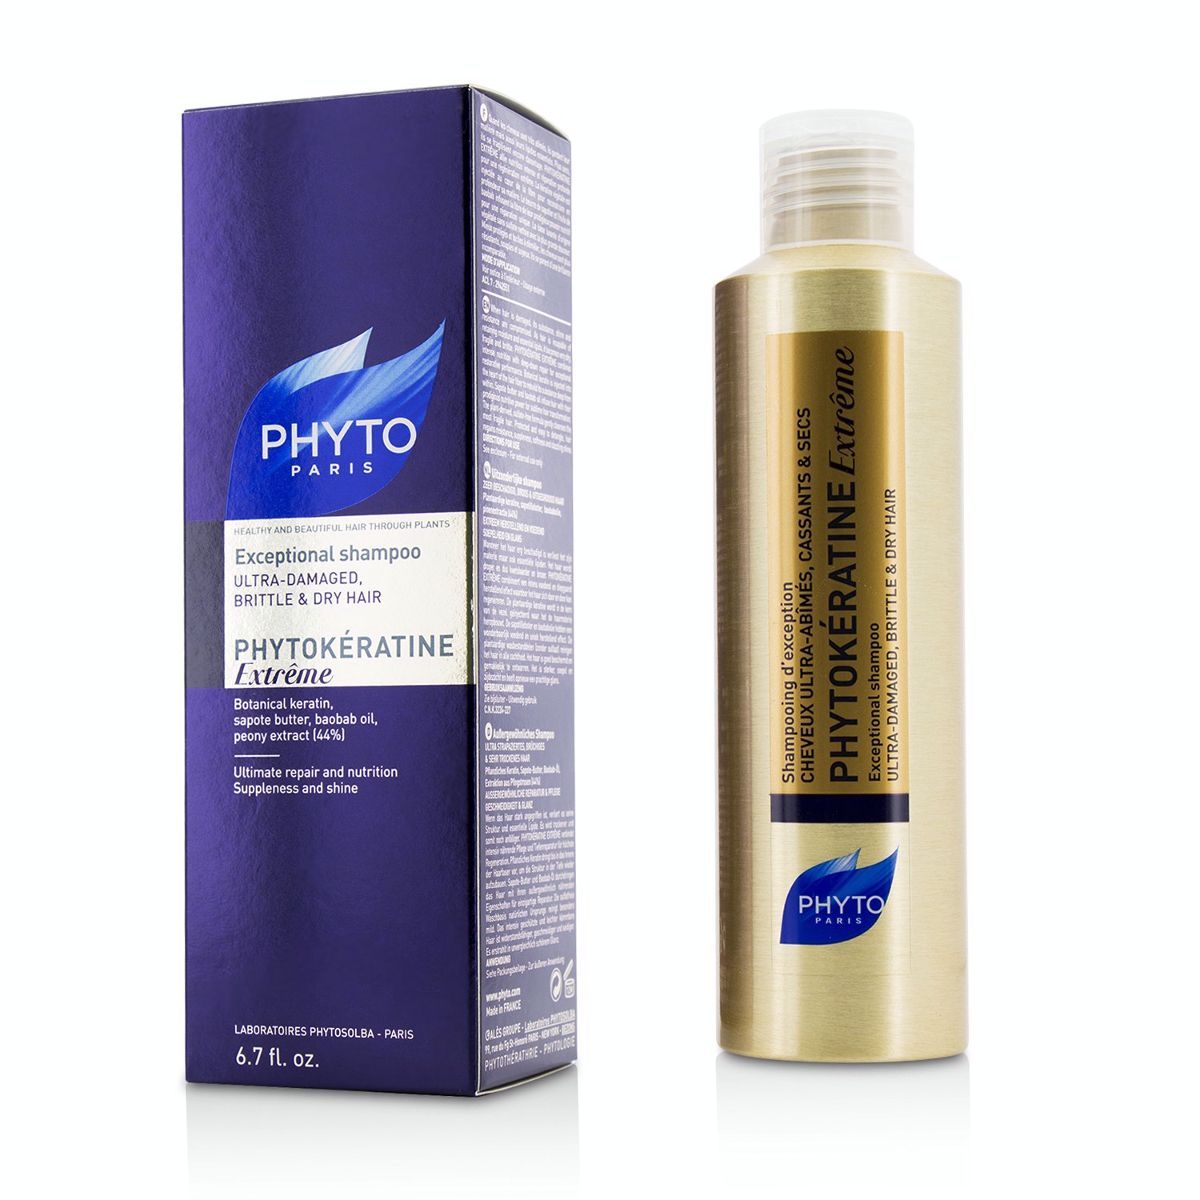 Phytokeratine Extreme Exceptional Shampoo (Ultra-Damaged Brittle  Dry Hair) Phyto Image